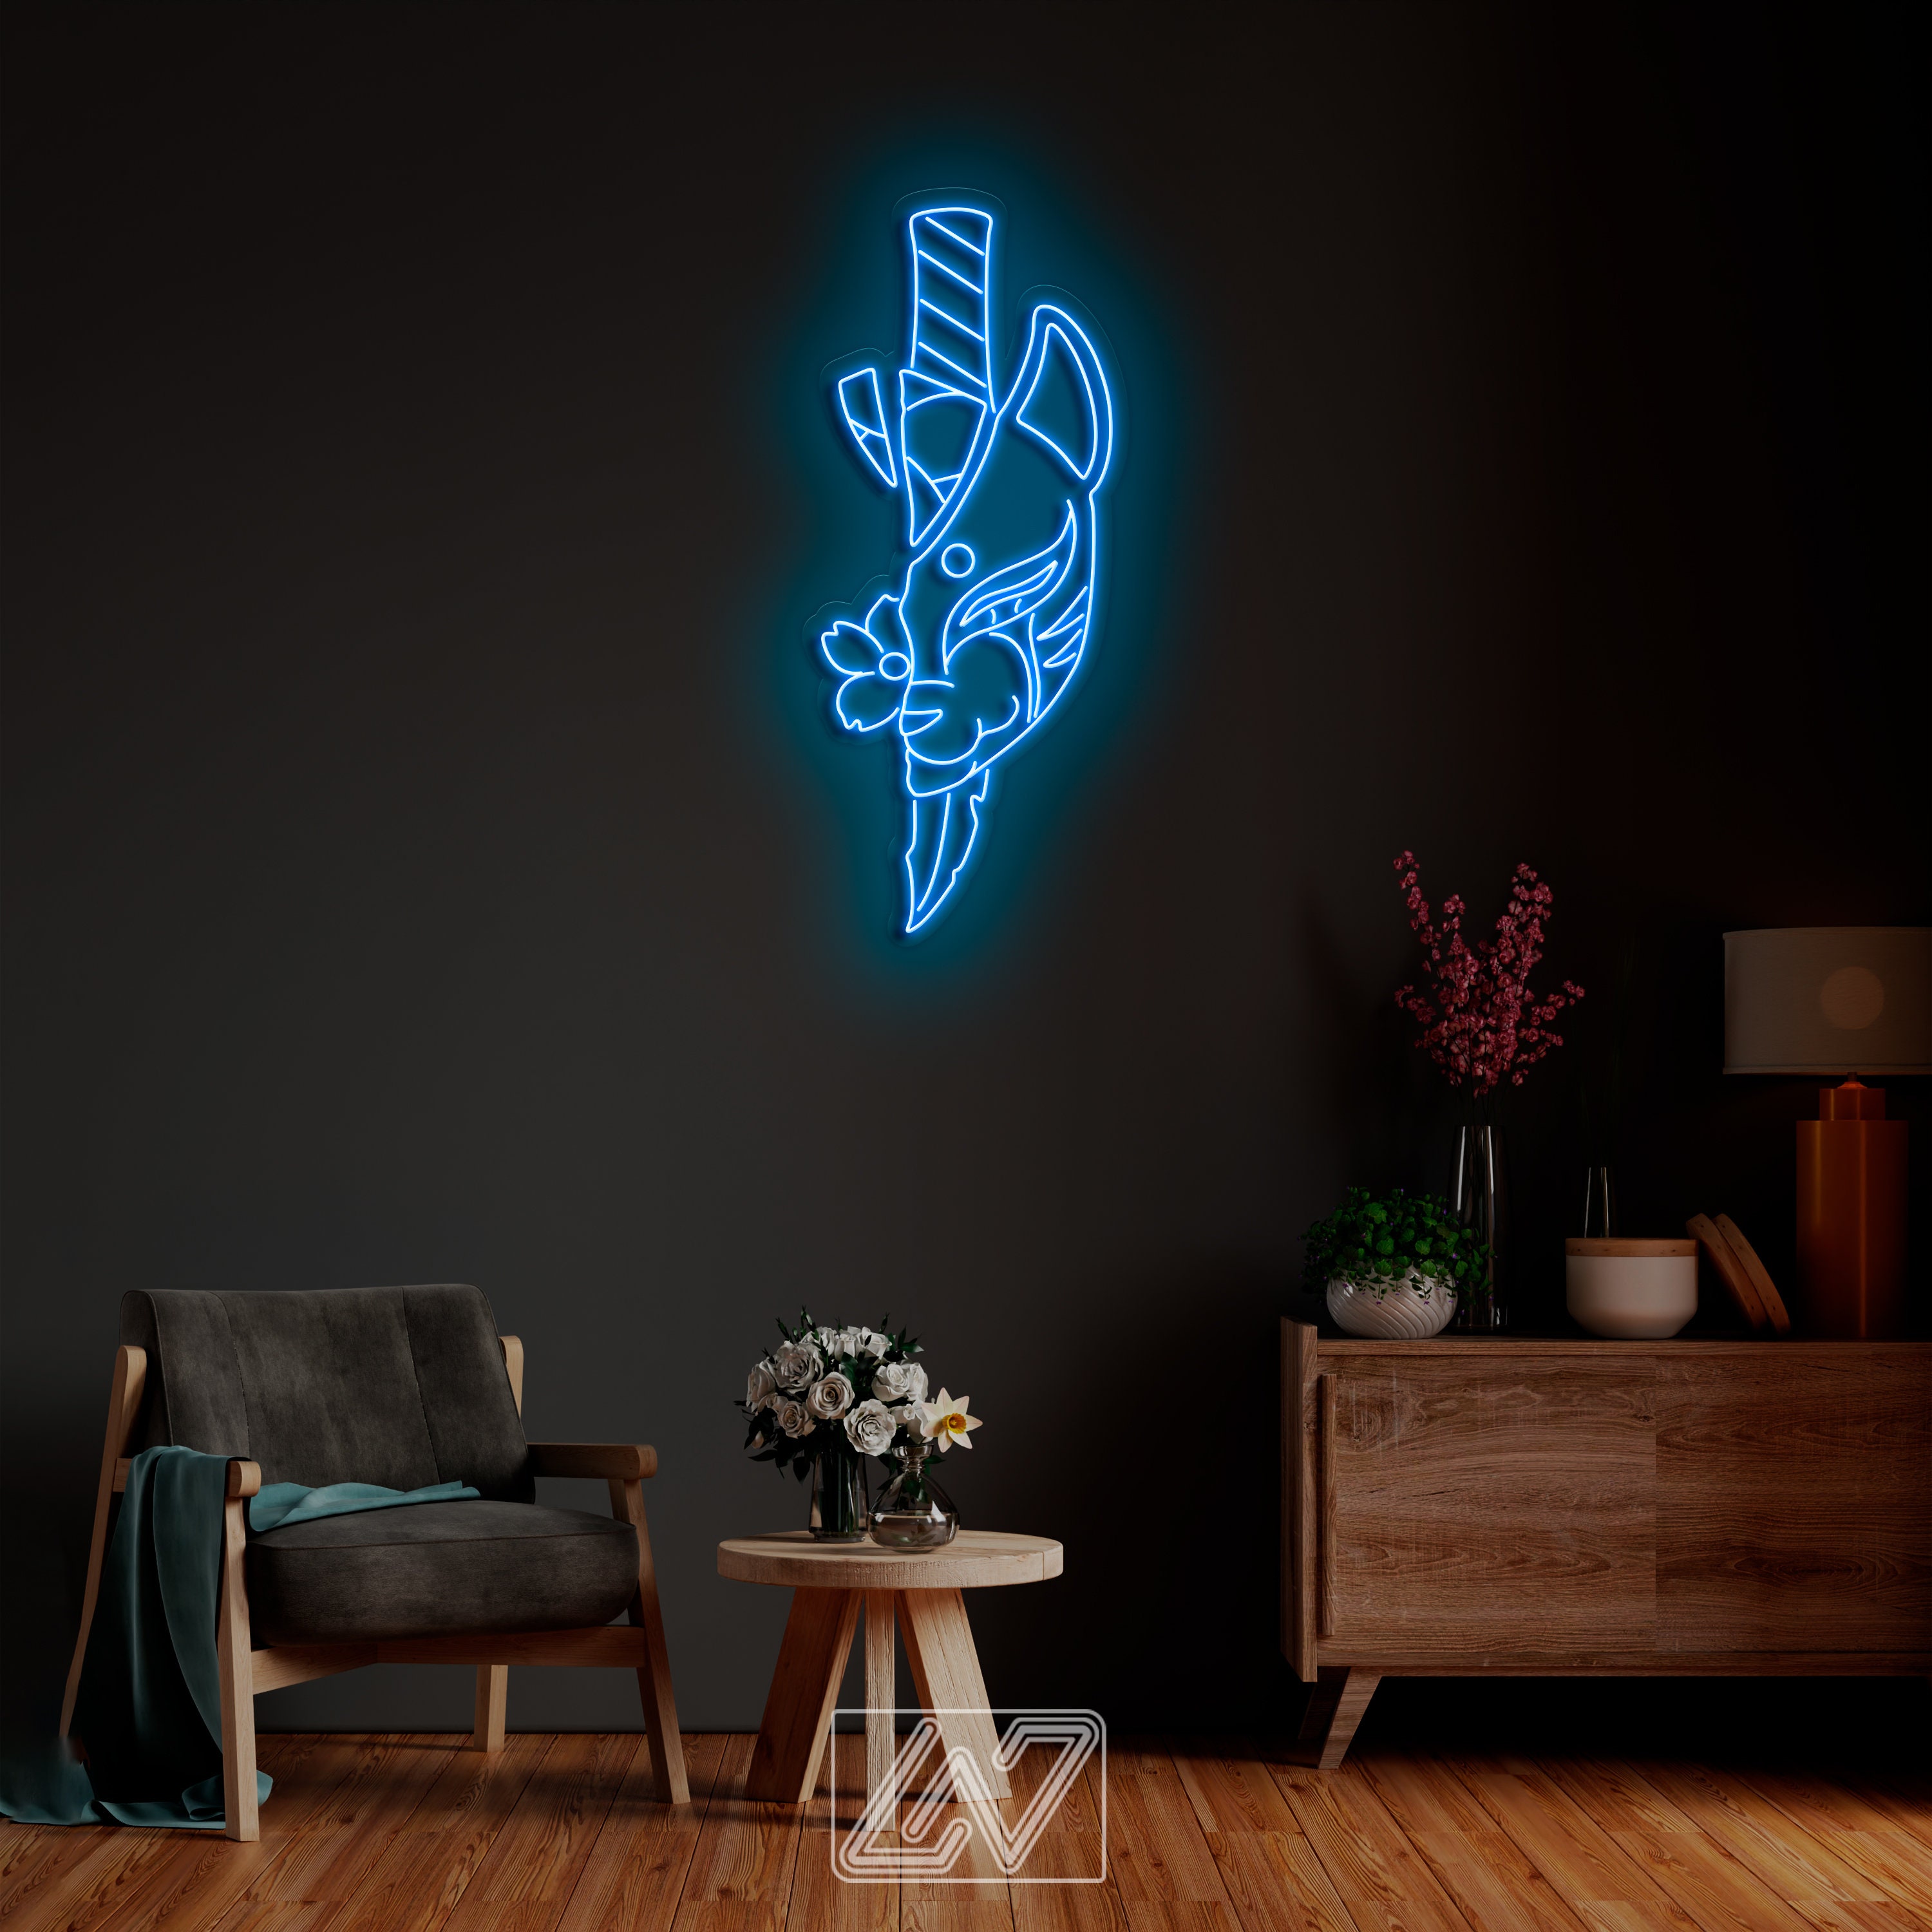 Anime Neon Sign Led Cloud Neon Light Sun Light Up Sign For Wall  Decor,Gaming Neon Sign For Game Room Kids Bedroom Room Shop Fun Gift For  Christmas